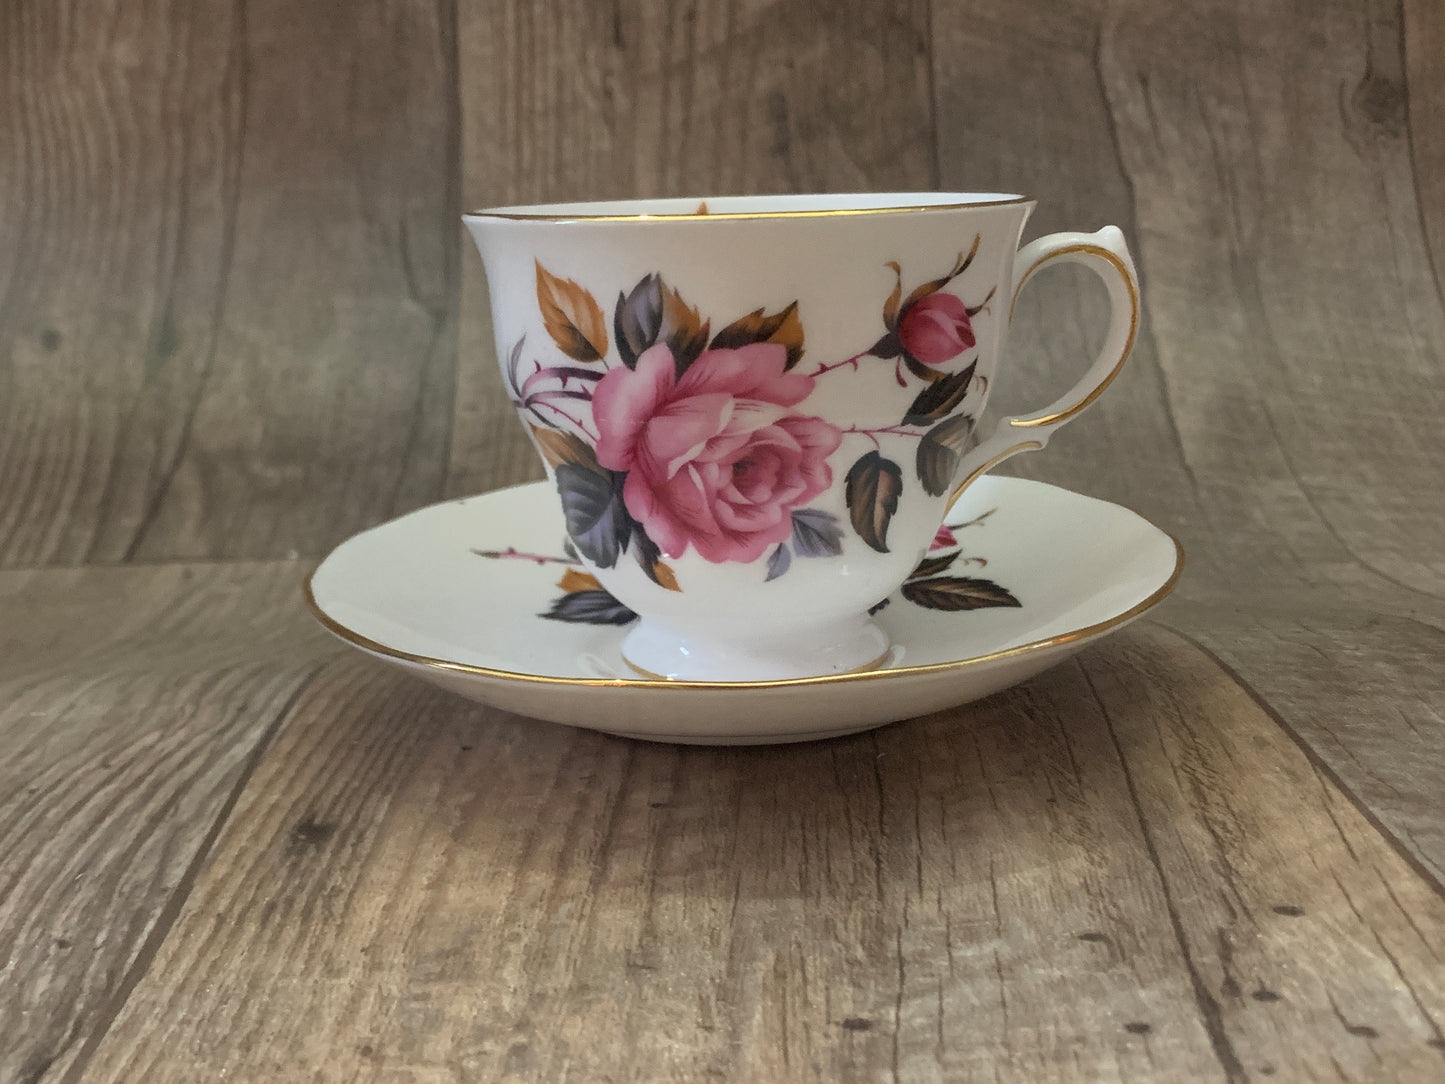 Pink Roses Vintage Teacup and Saucer Mothers Day Gift Grand Millennial Gifts